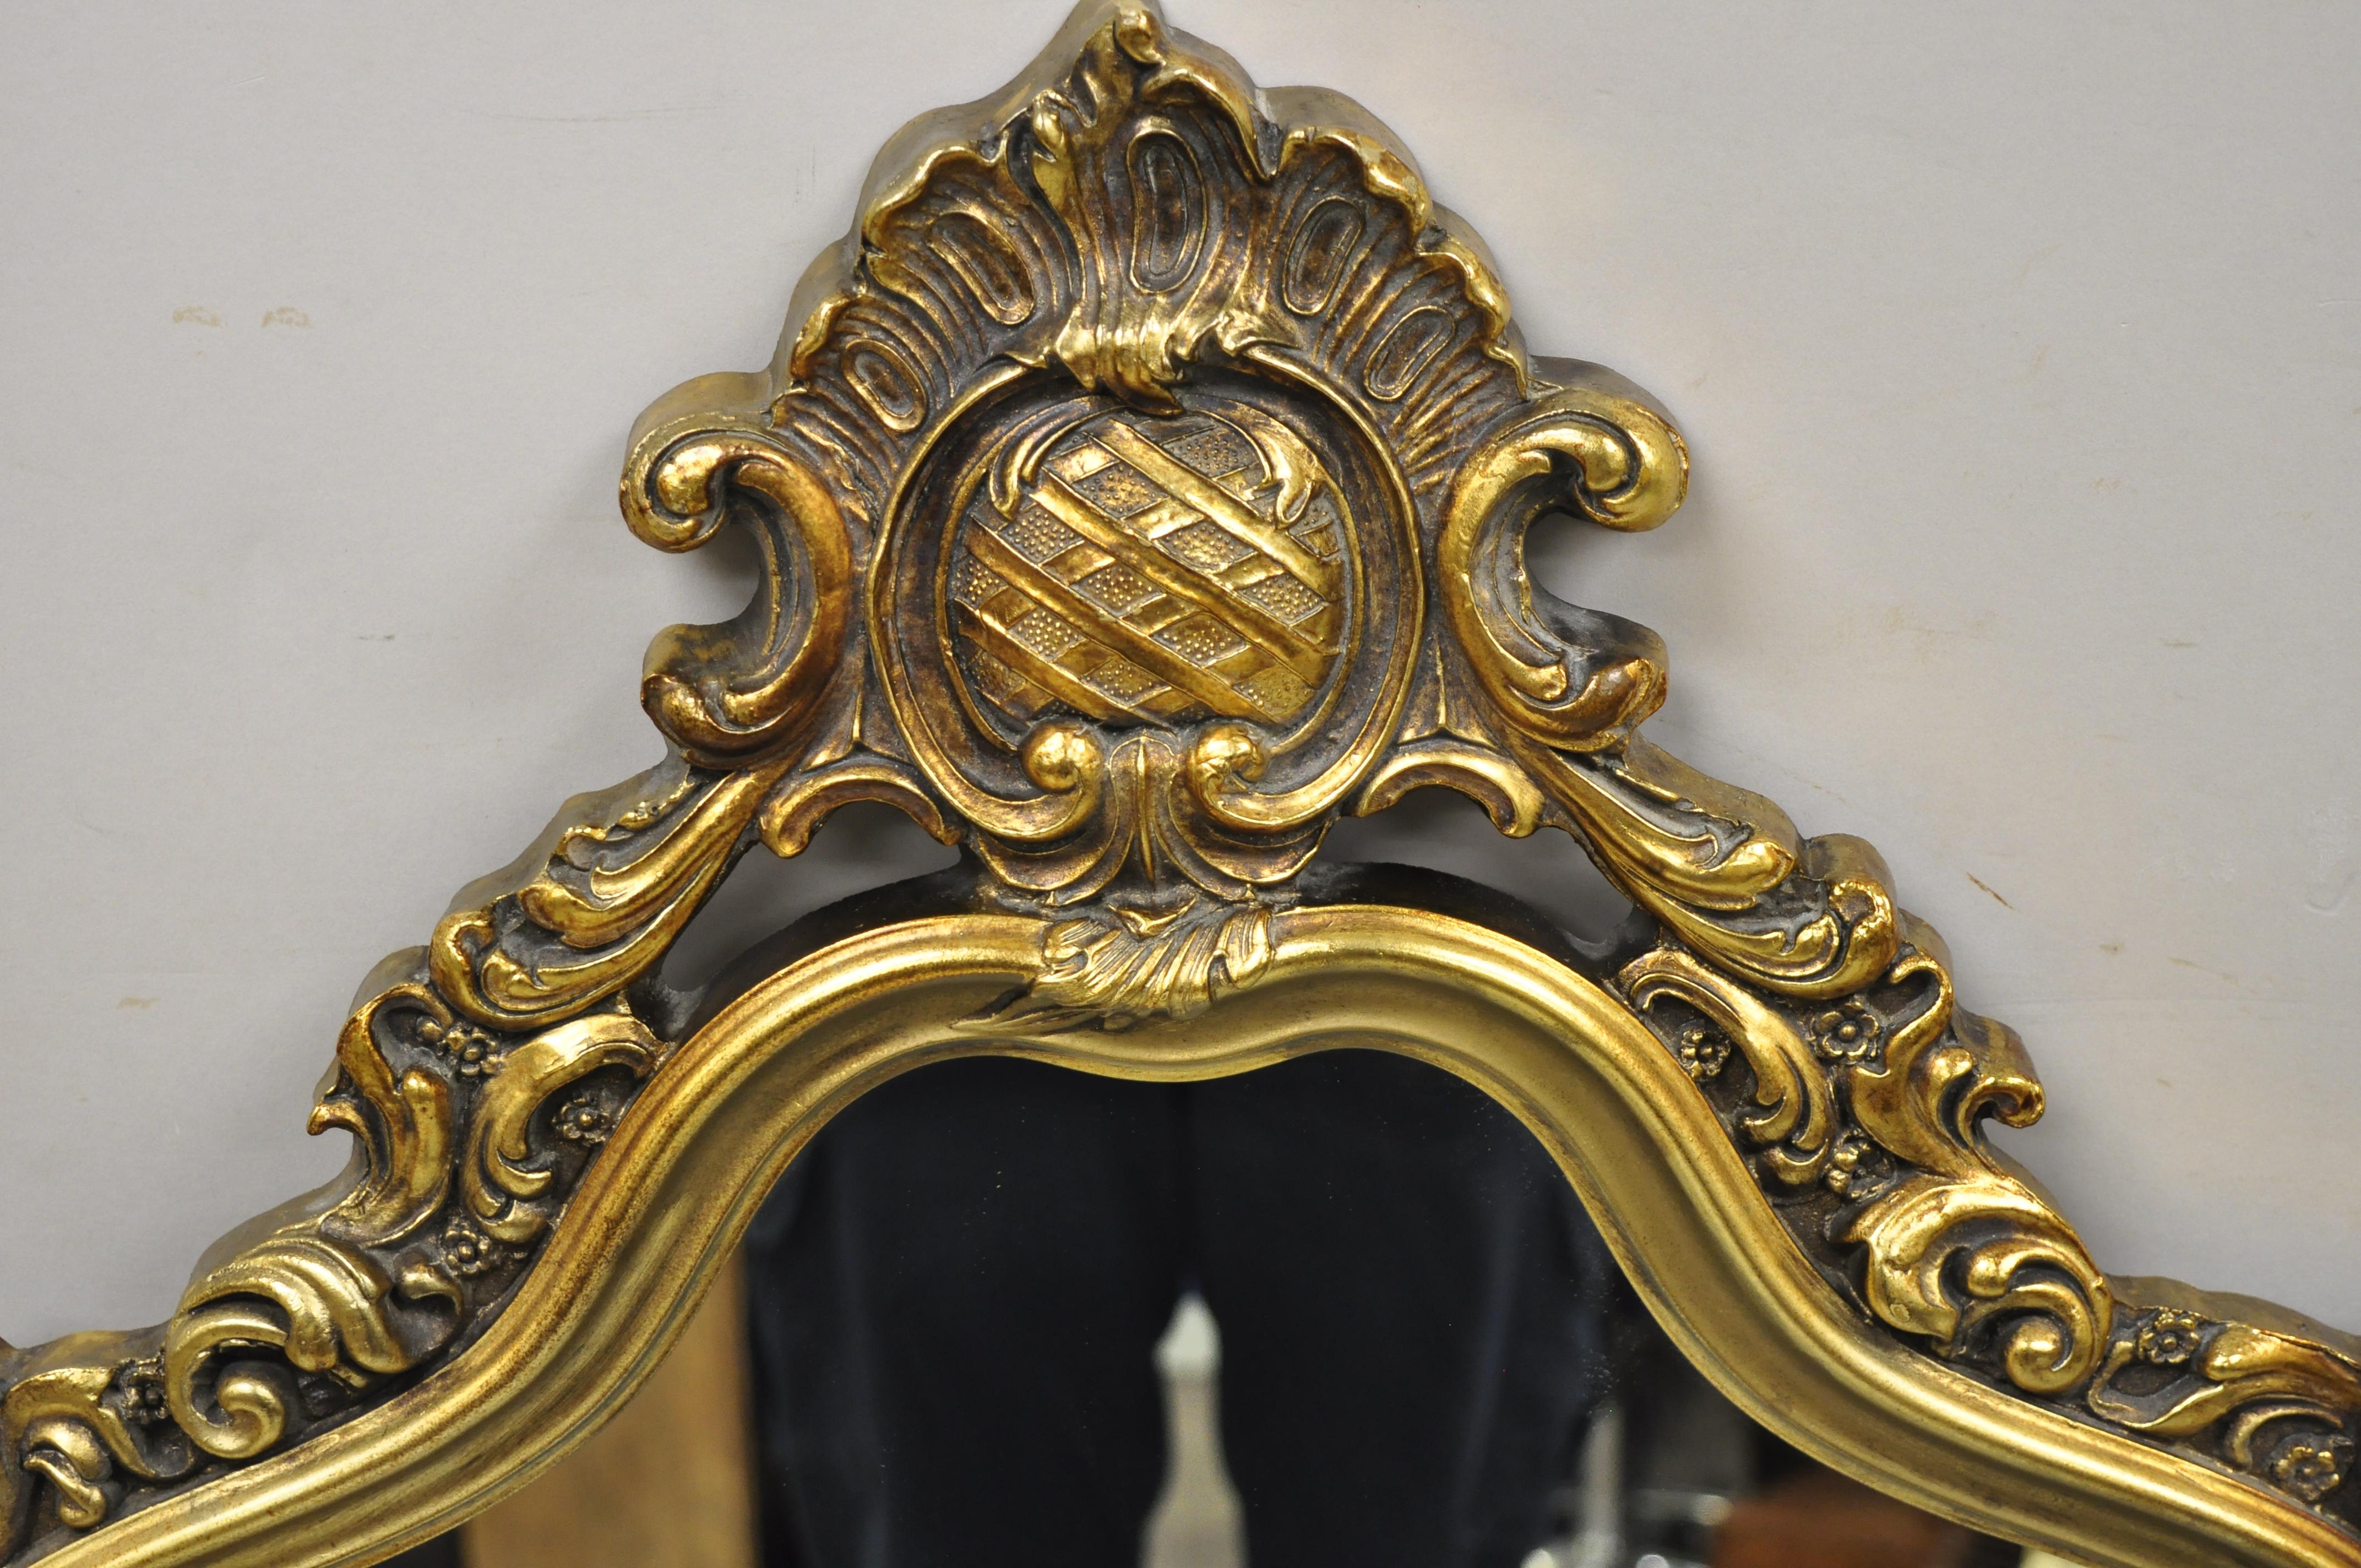 Vintage French Rococo style ornate gold frame console wall mirror. Item features molded foam ornate Rococo frame, very nice vintage item, great style and form. Circa mid to late 20th century. Measurements: 50